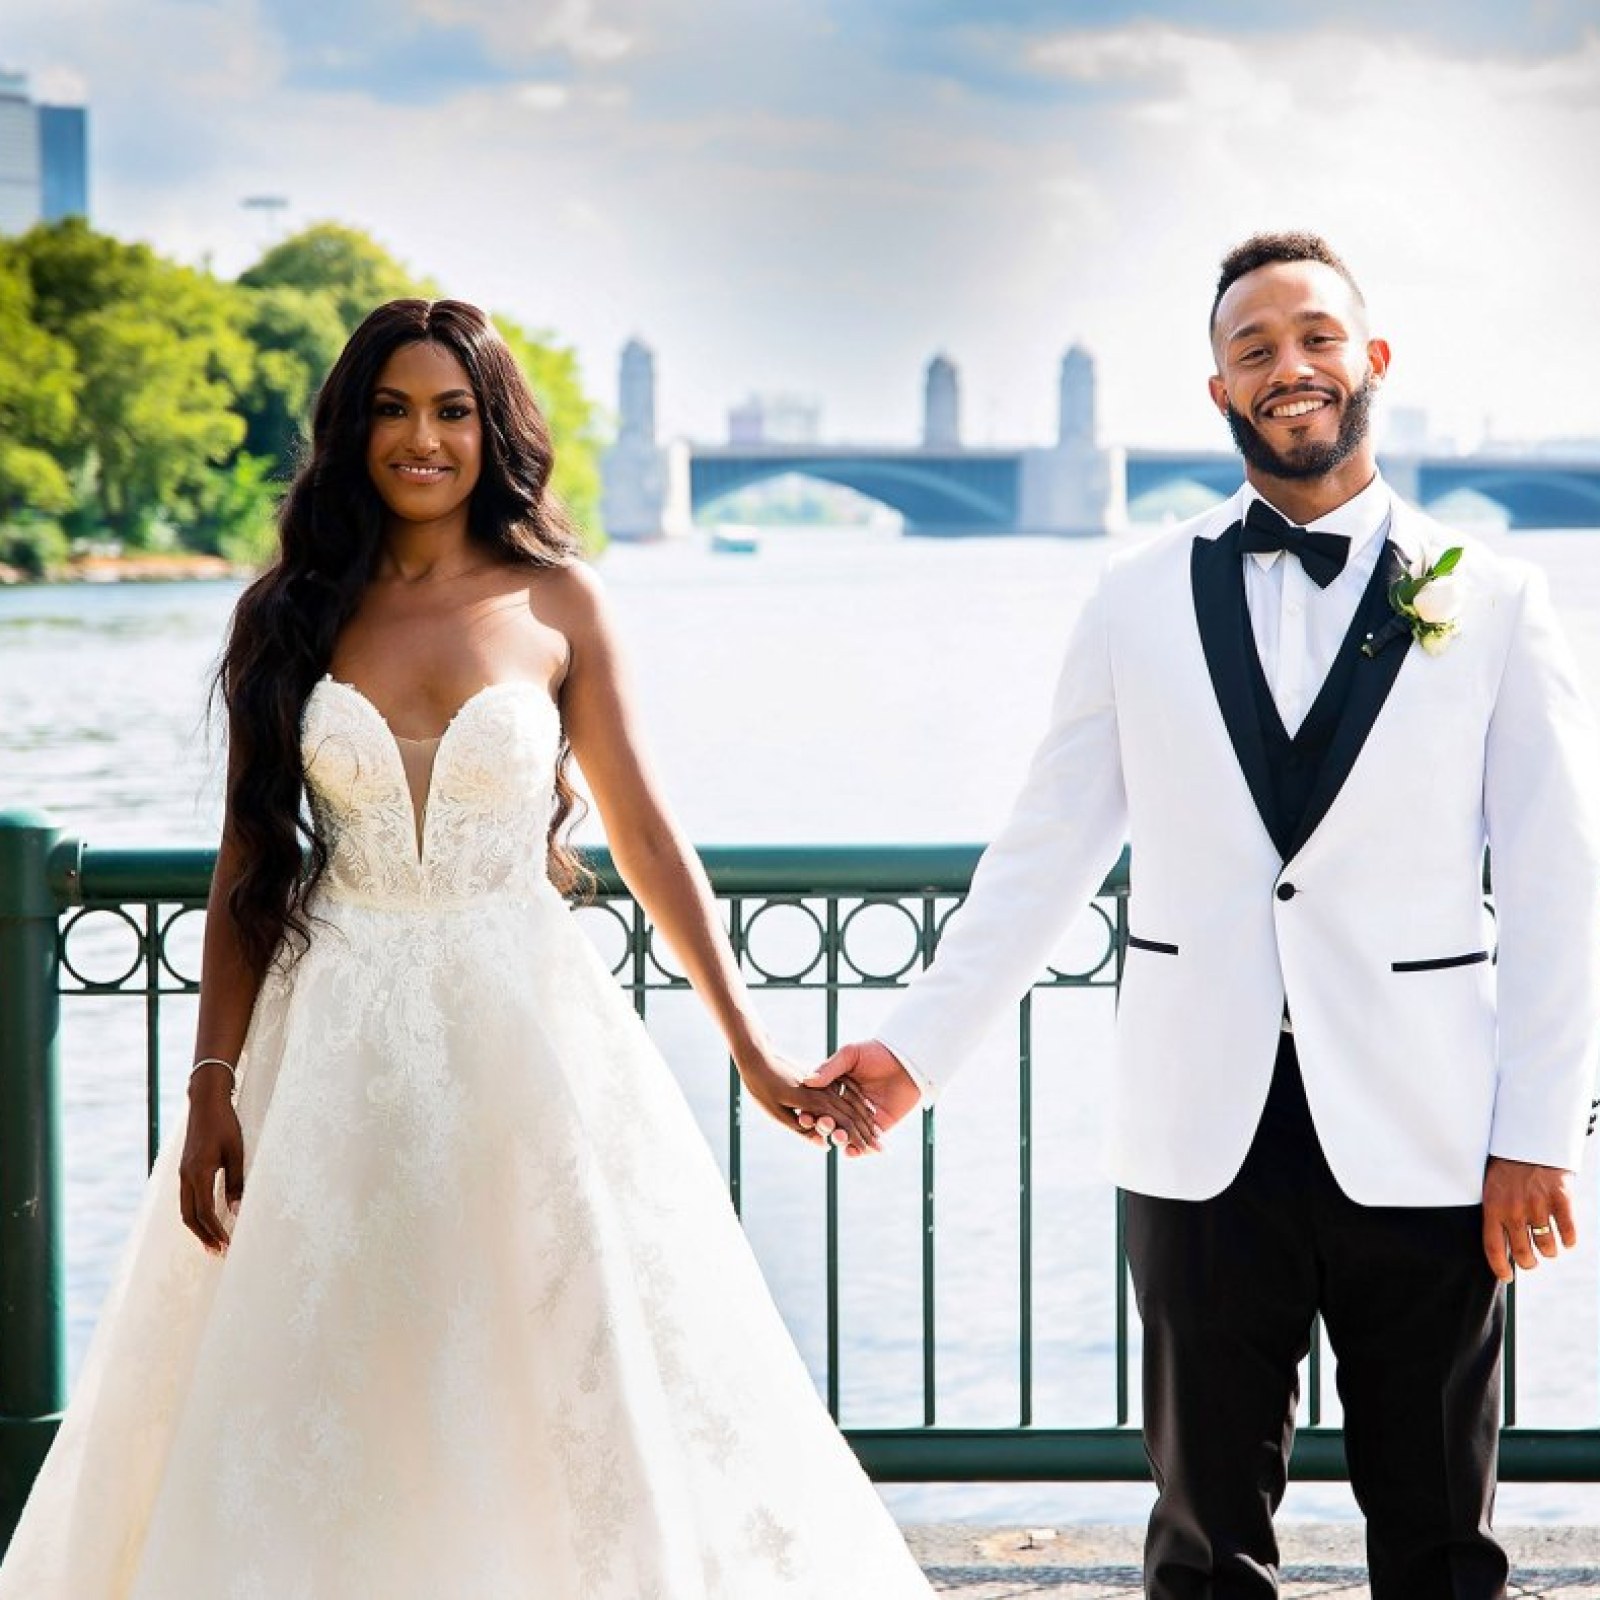 Married at First Sight' Season 11 Cast: Meet the Couples